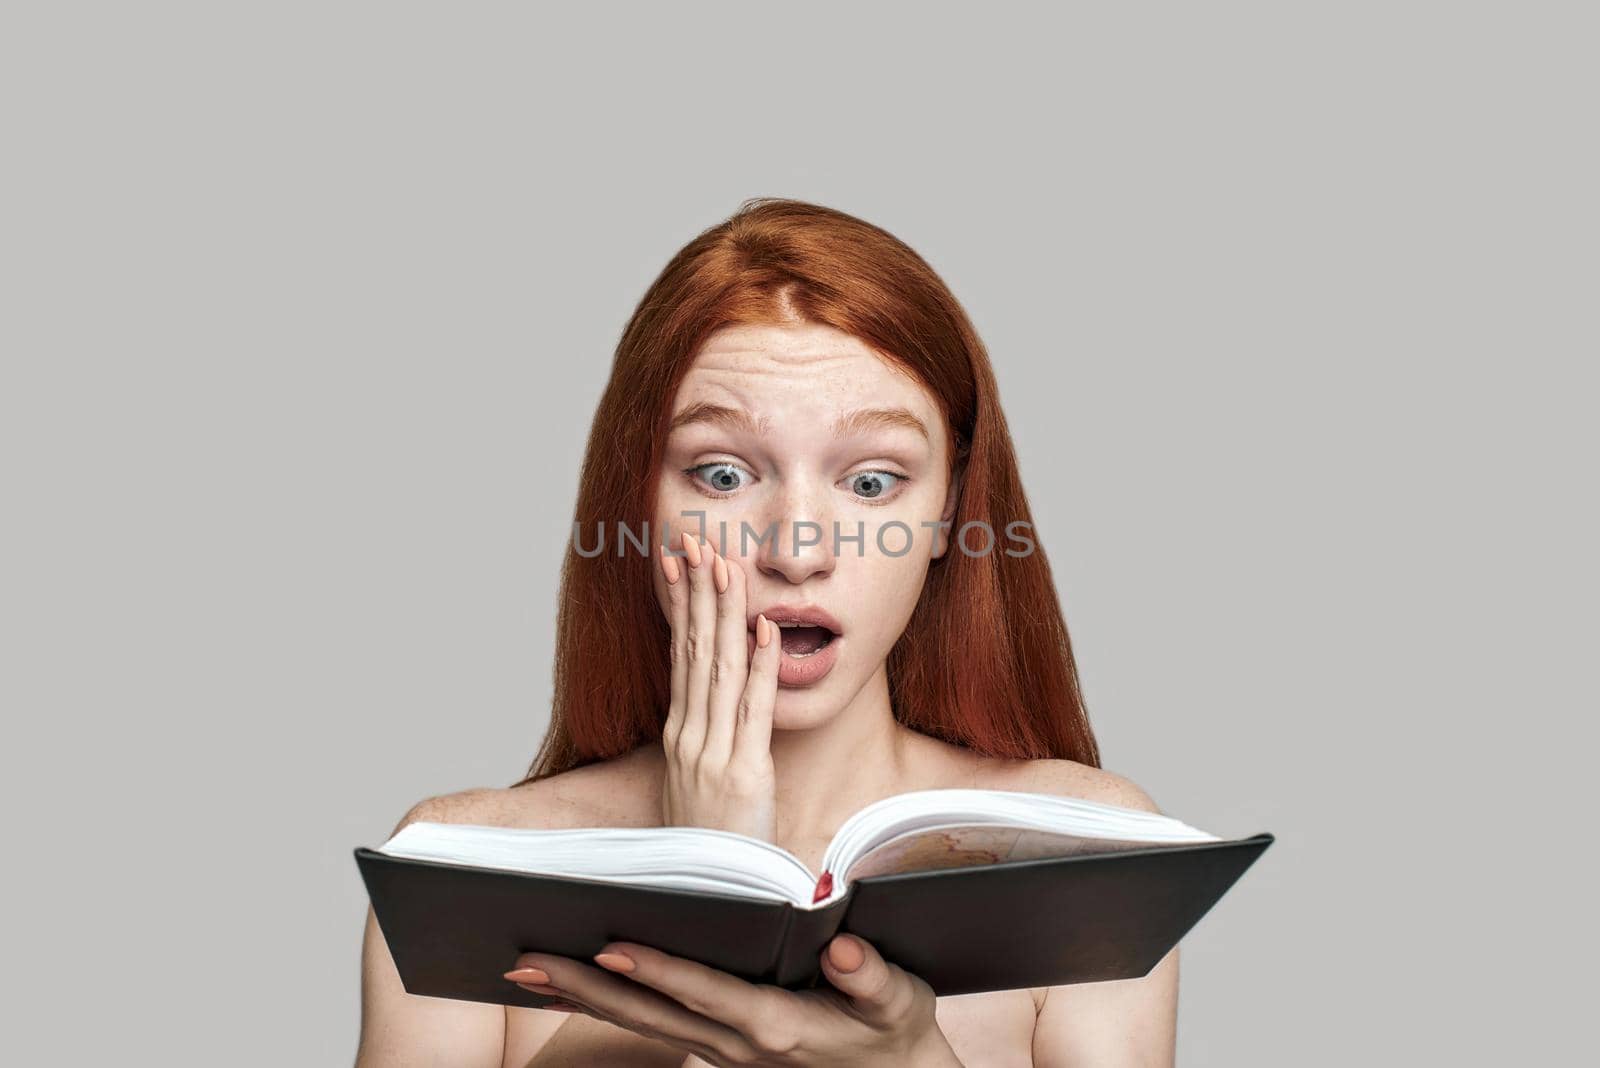 Studio shot of shocked young redhead woman reading a book and keeping mouth opened while standing against grey background